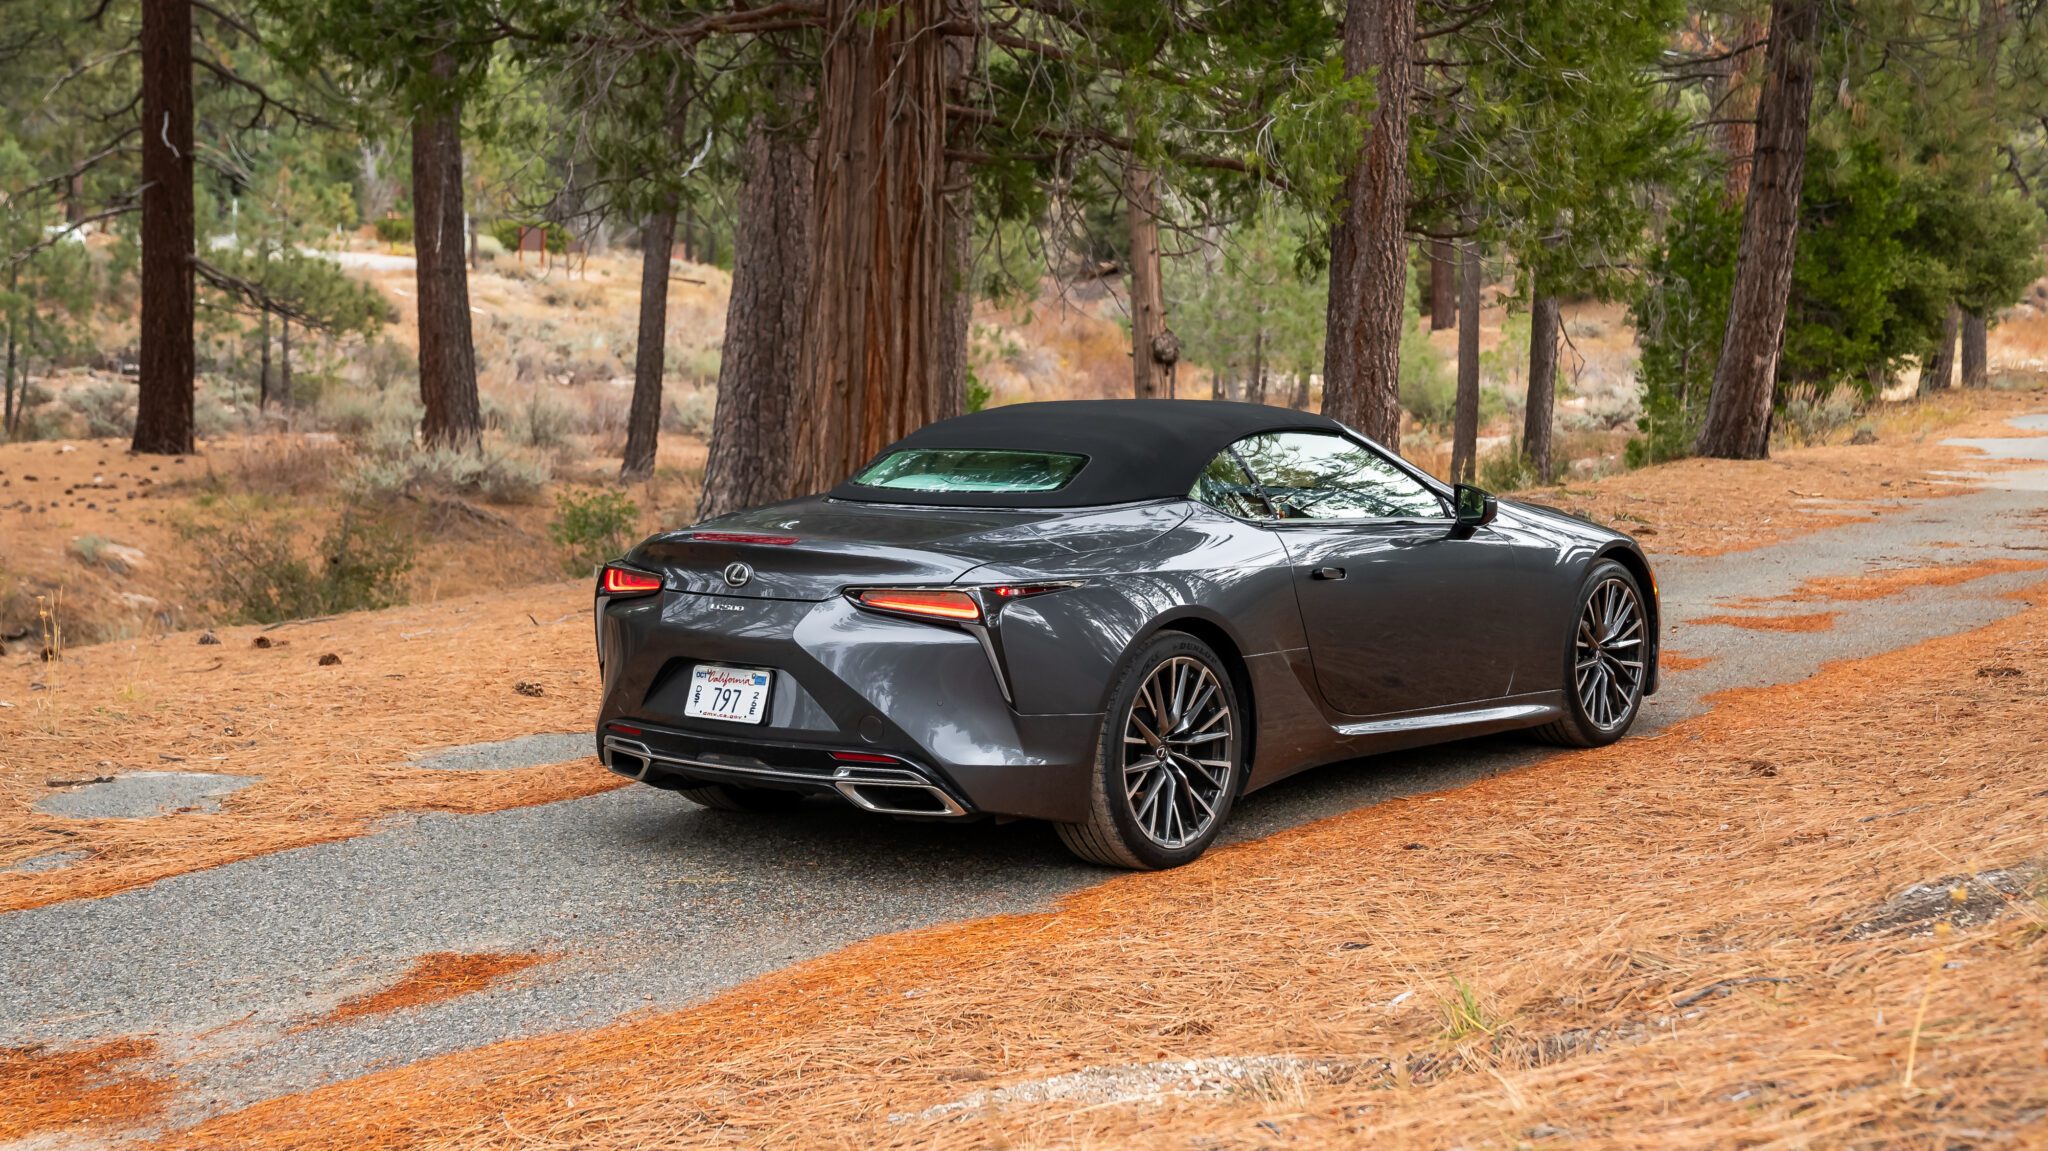 Lexus LC 500 Convertible parked outdoors.